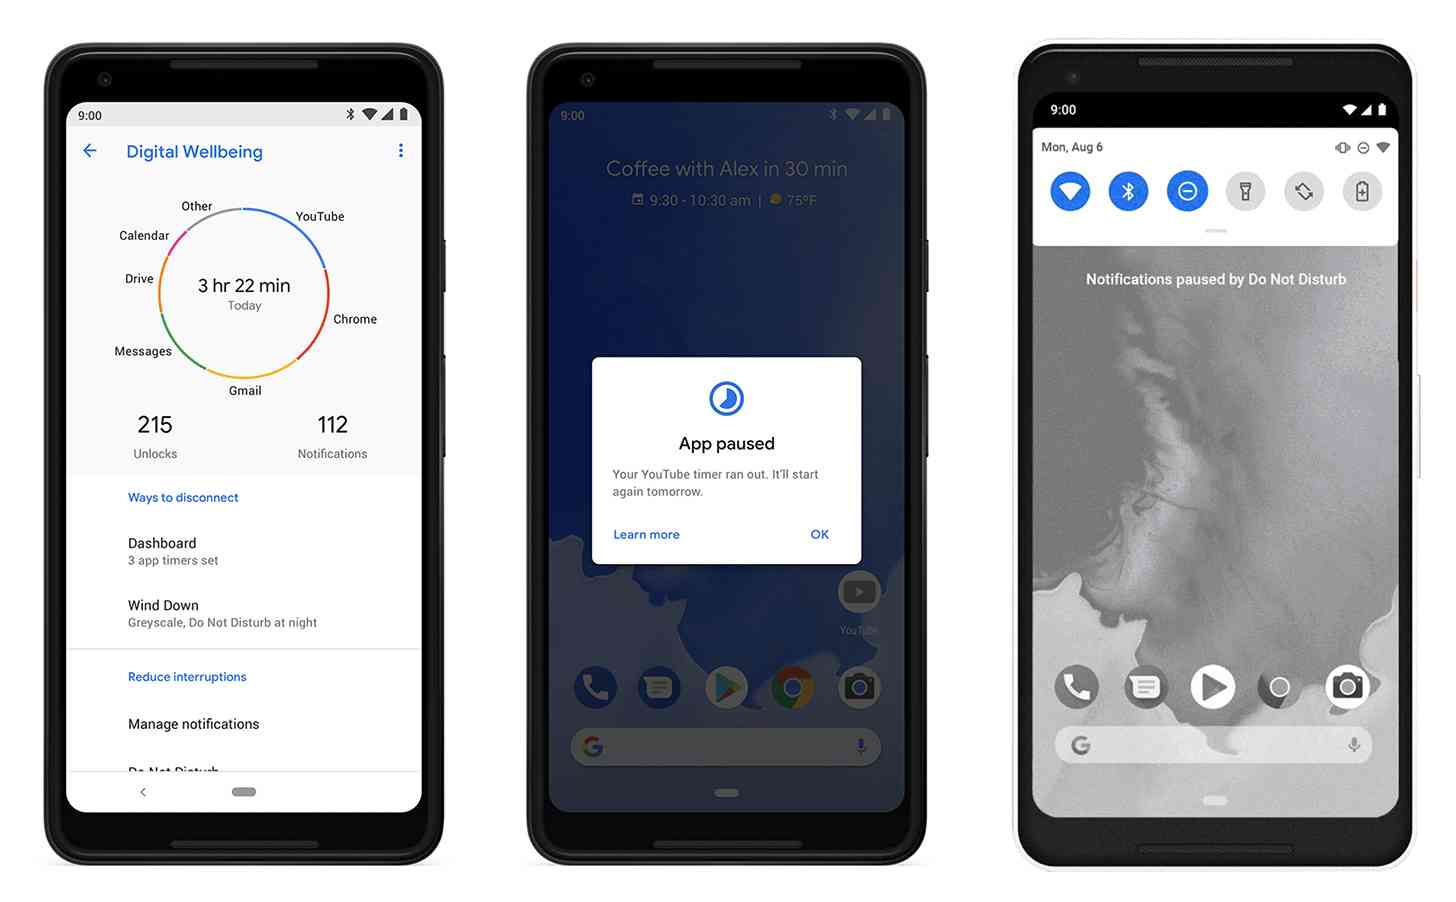 Google Digital Wellbeing Android app features